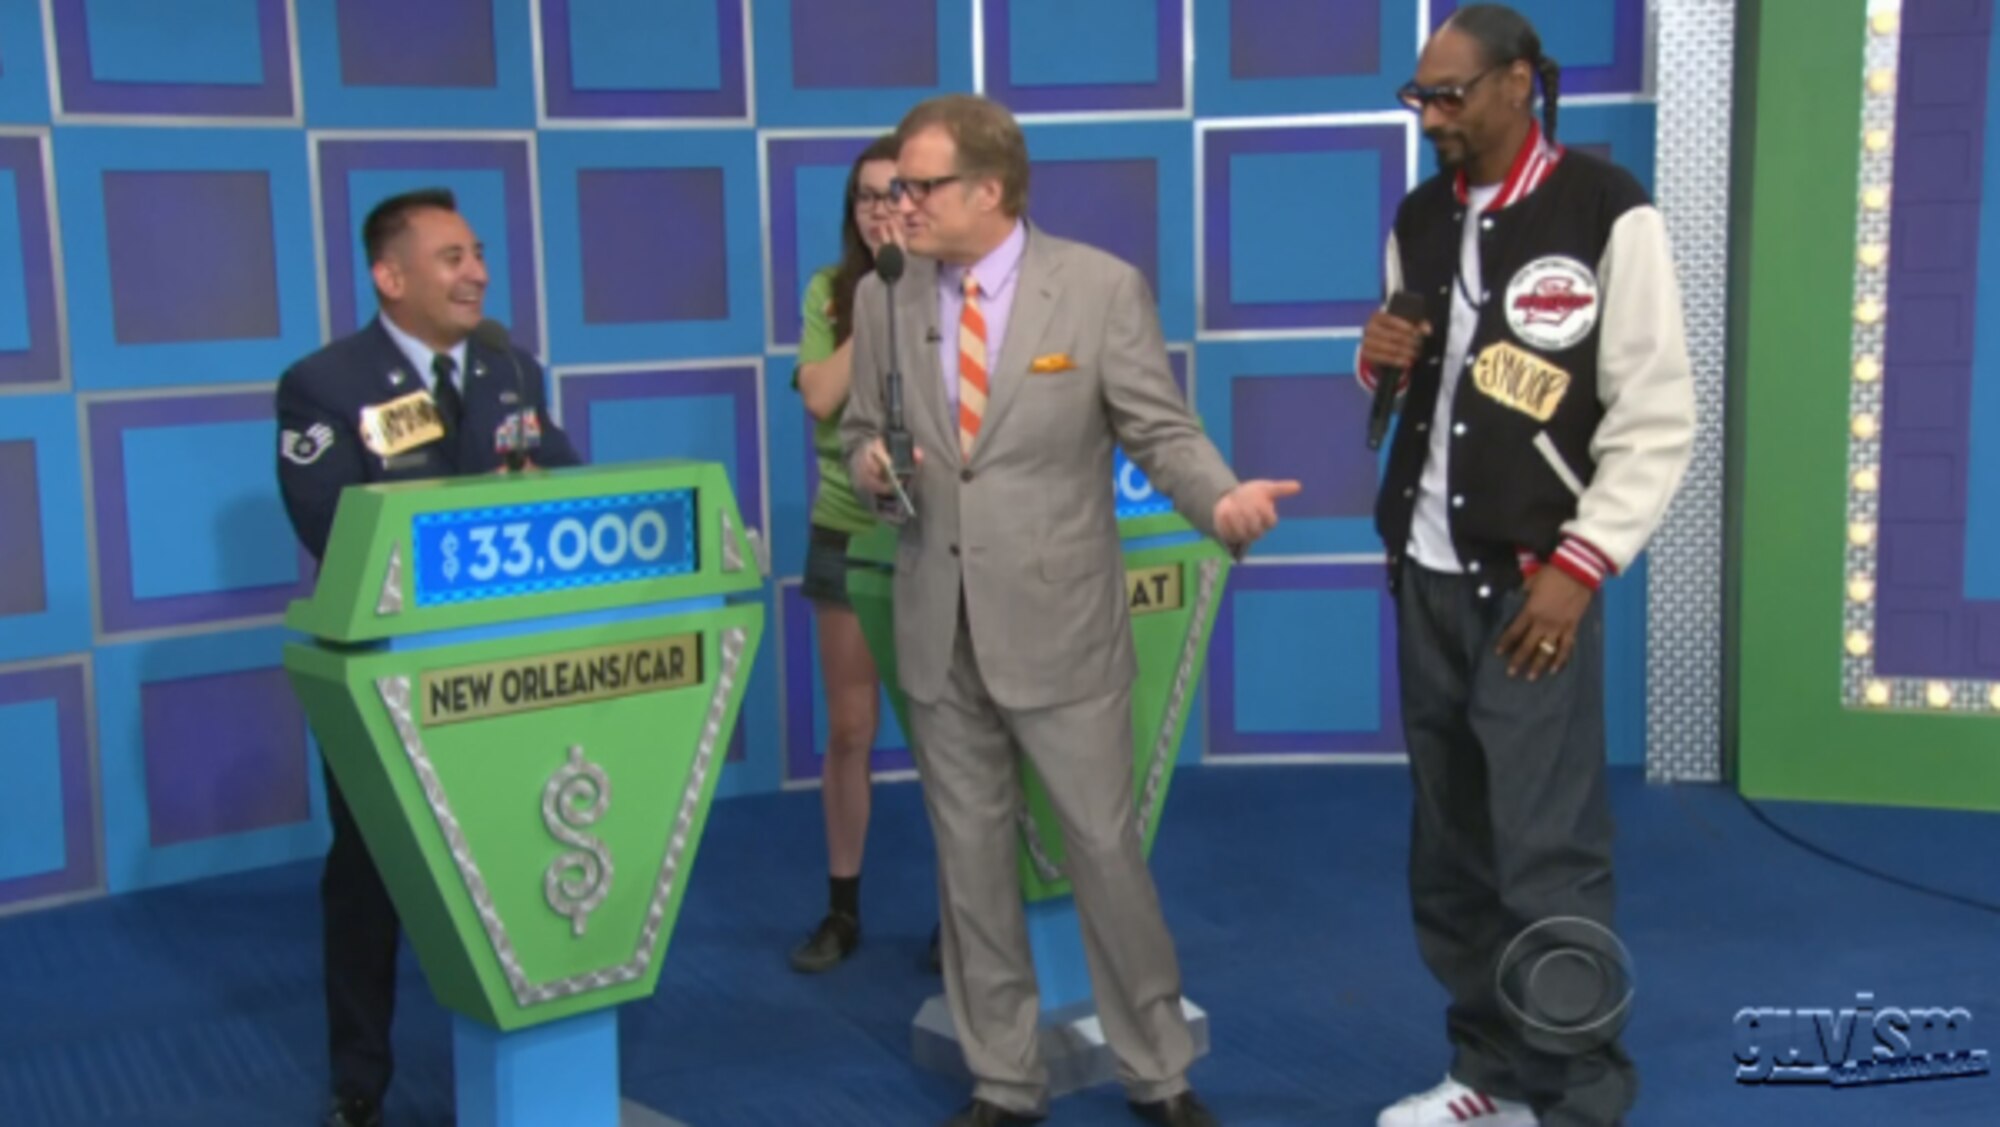 VANDENBERG AIR FORCE BASE, Calif. -- Tech. Sgt. Armando Galaviz II, Vandenberg Fire north battalion chief, talks to Drew Carey, game show host, Aug. 24, at the “Price is Right” studio in Burbank Calif.  Galaviz won the grand prize worth more than $33,000.
 (Courtesy Photo)  
